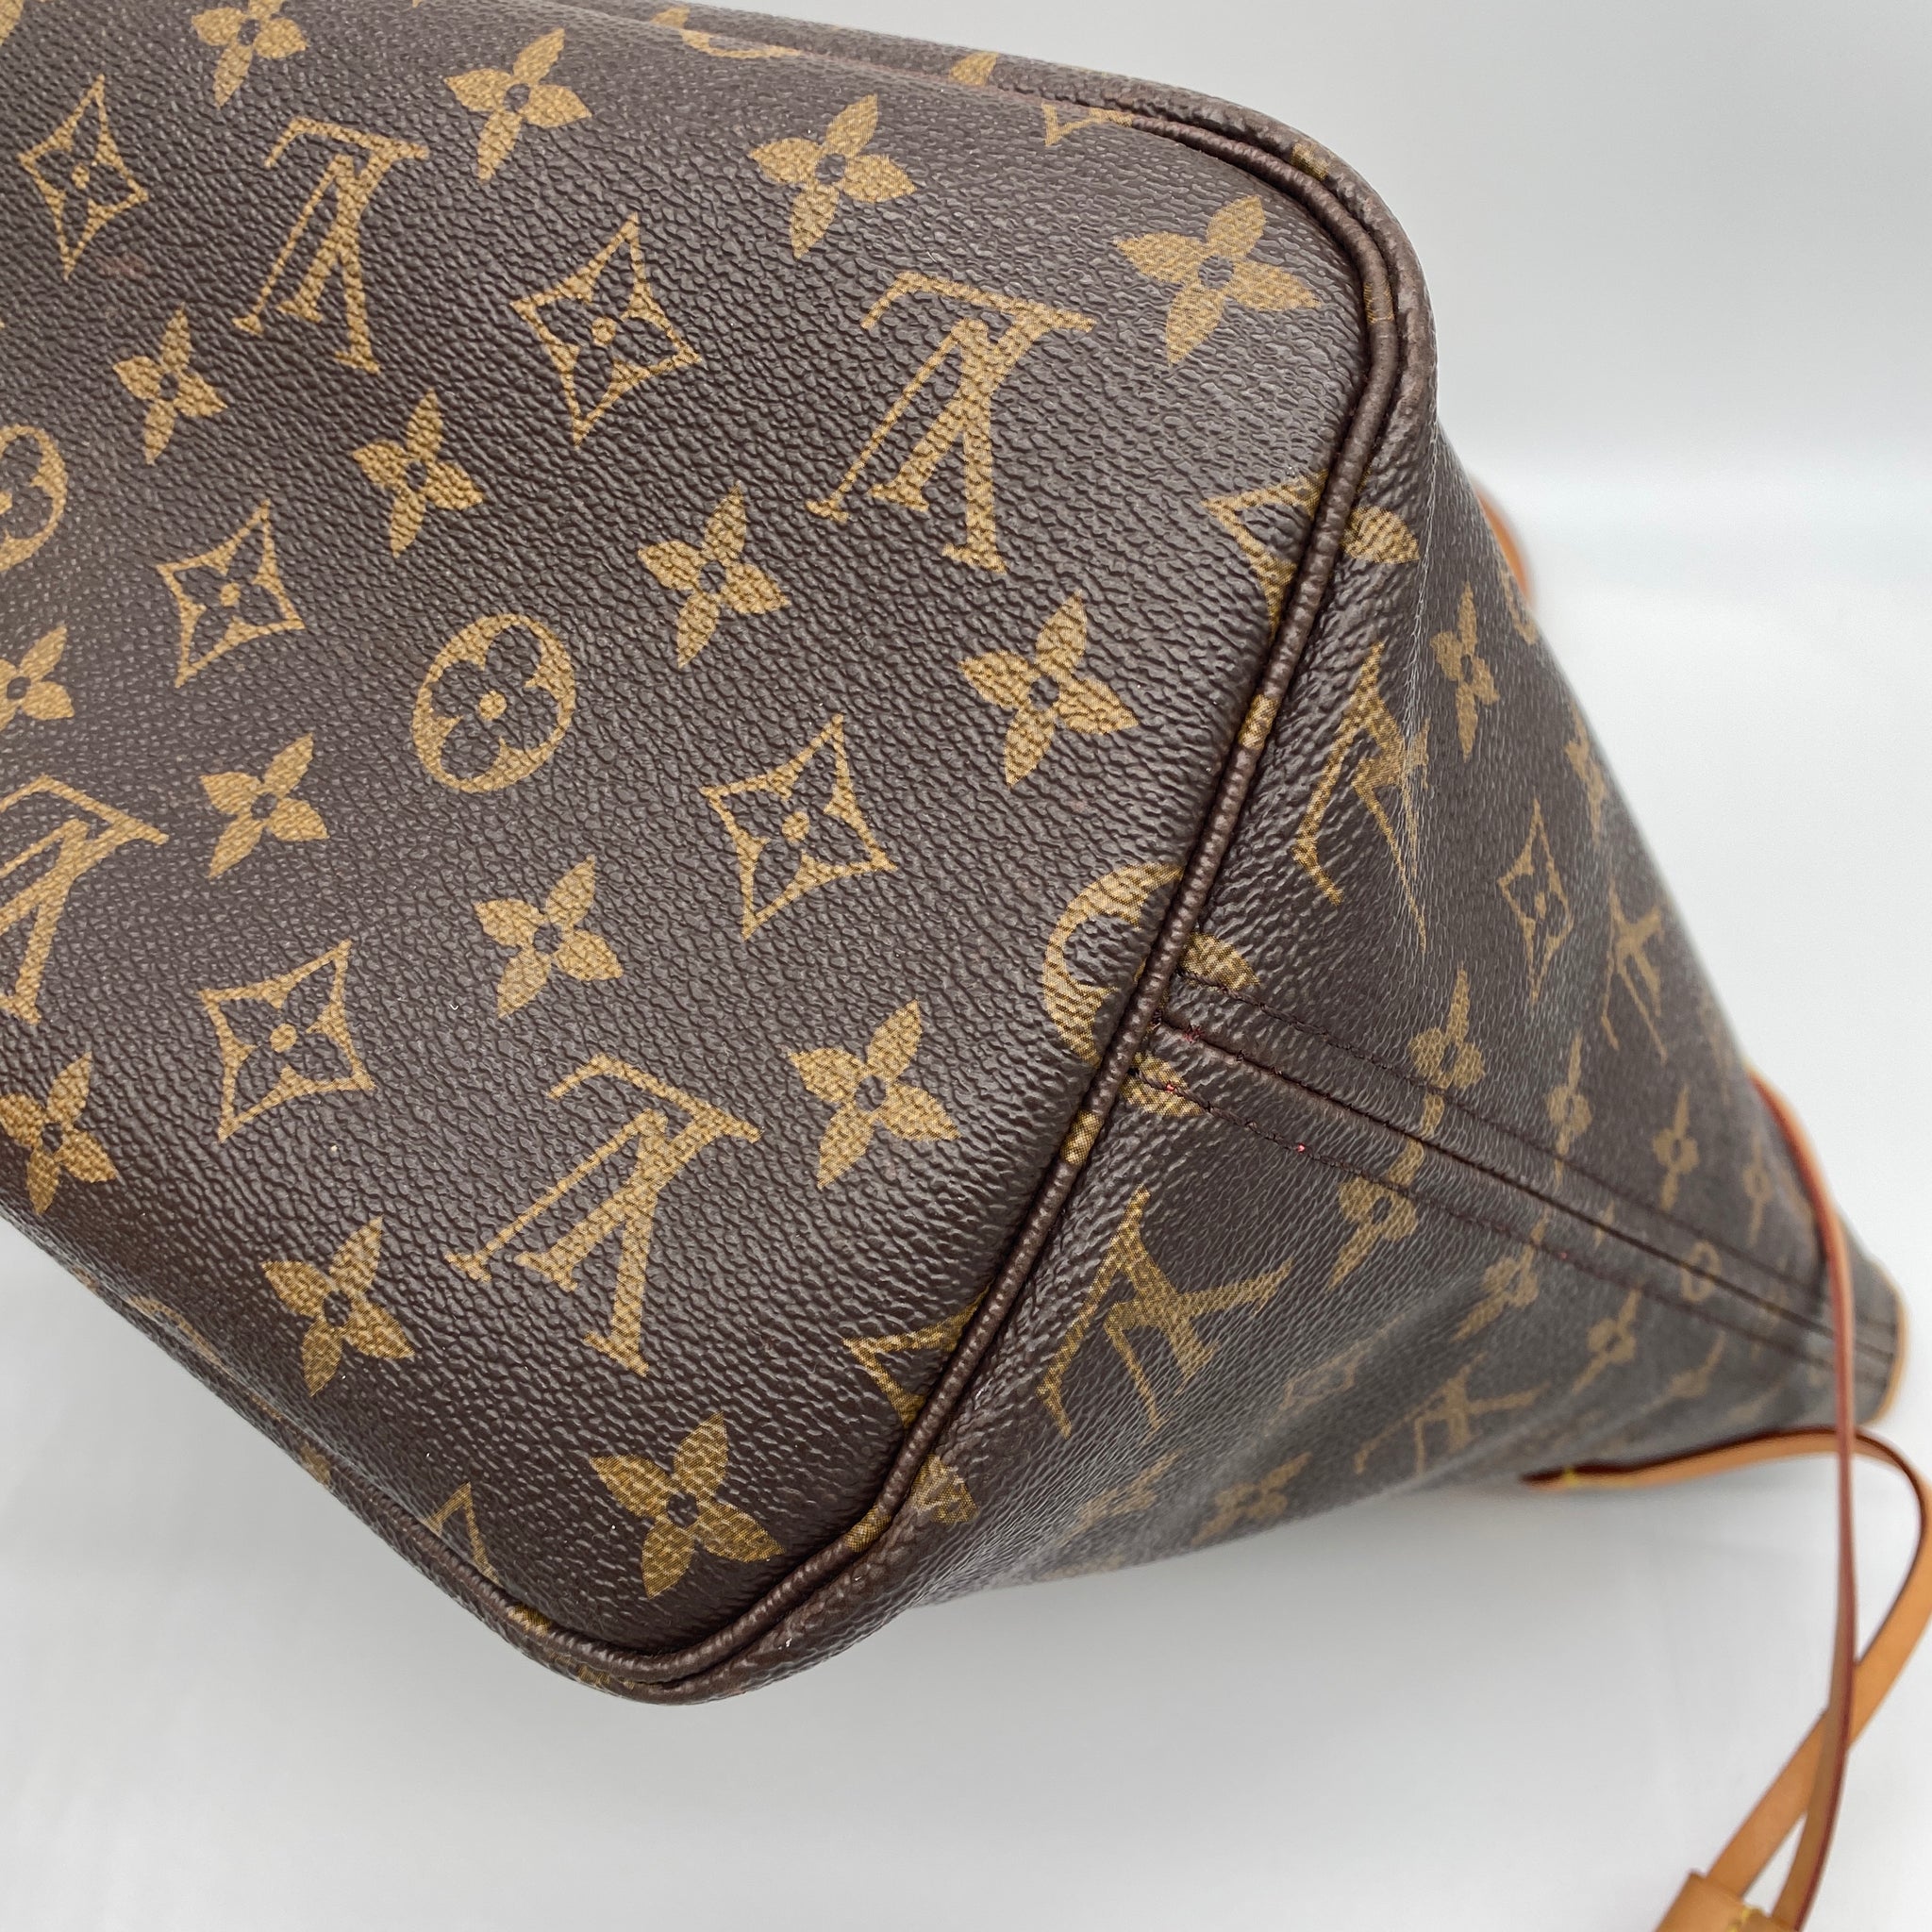 NEW Louis Vuitton Neverfull MM - CHERRY INTERIOR- NWT RARE- Sold W